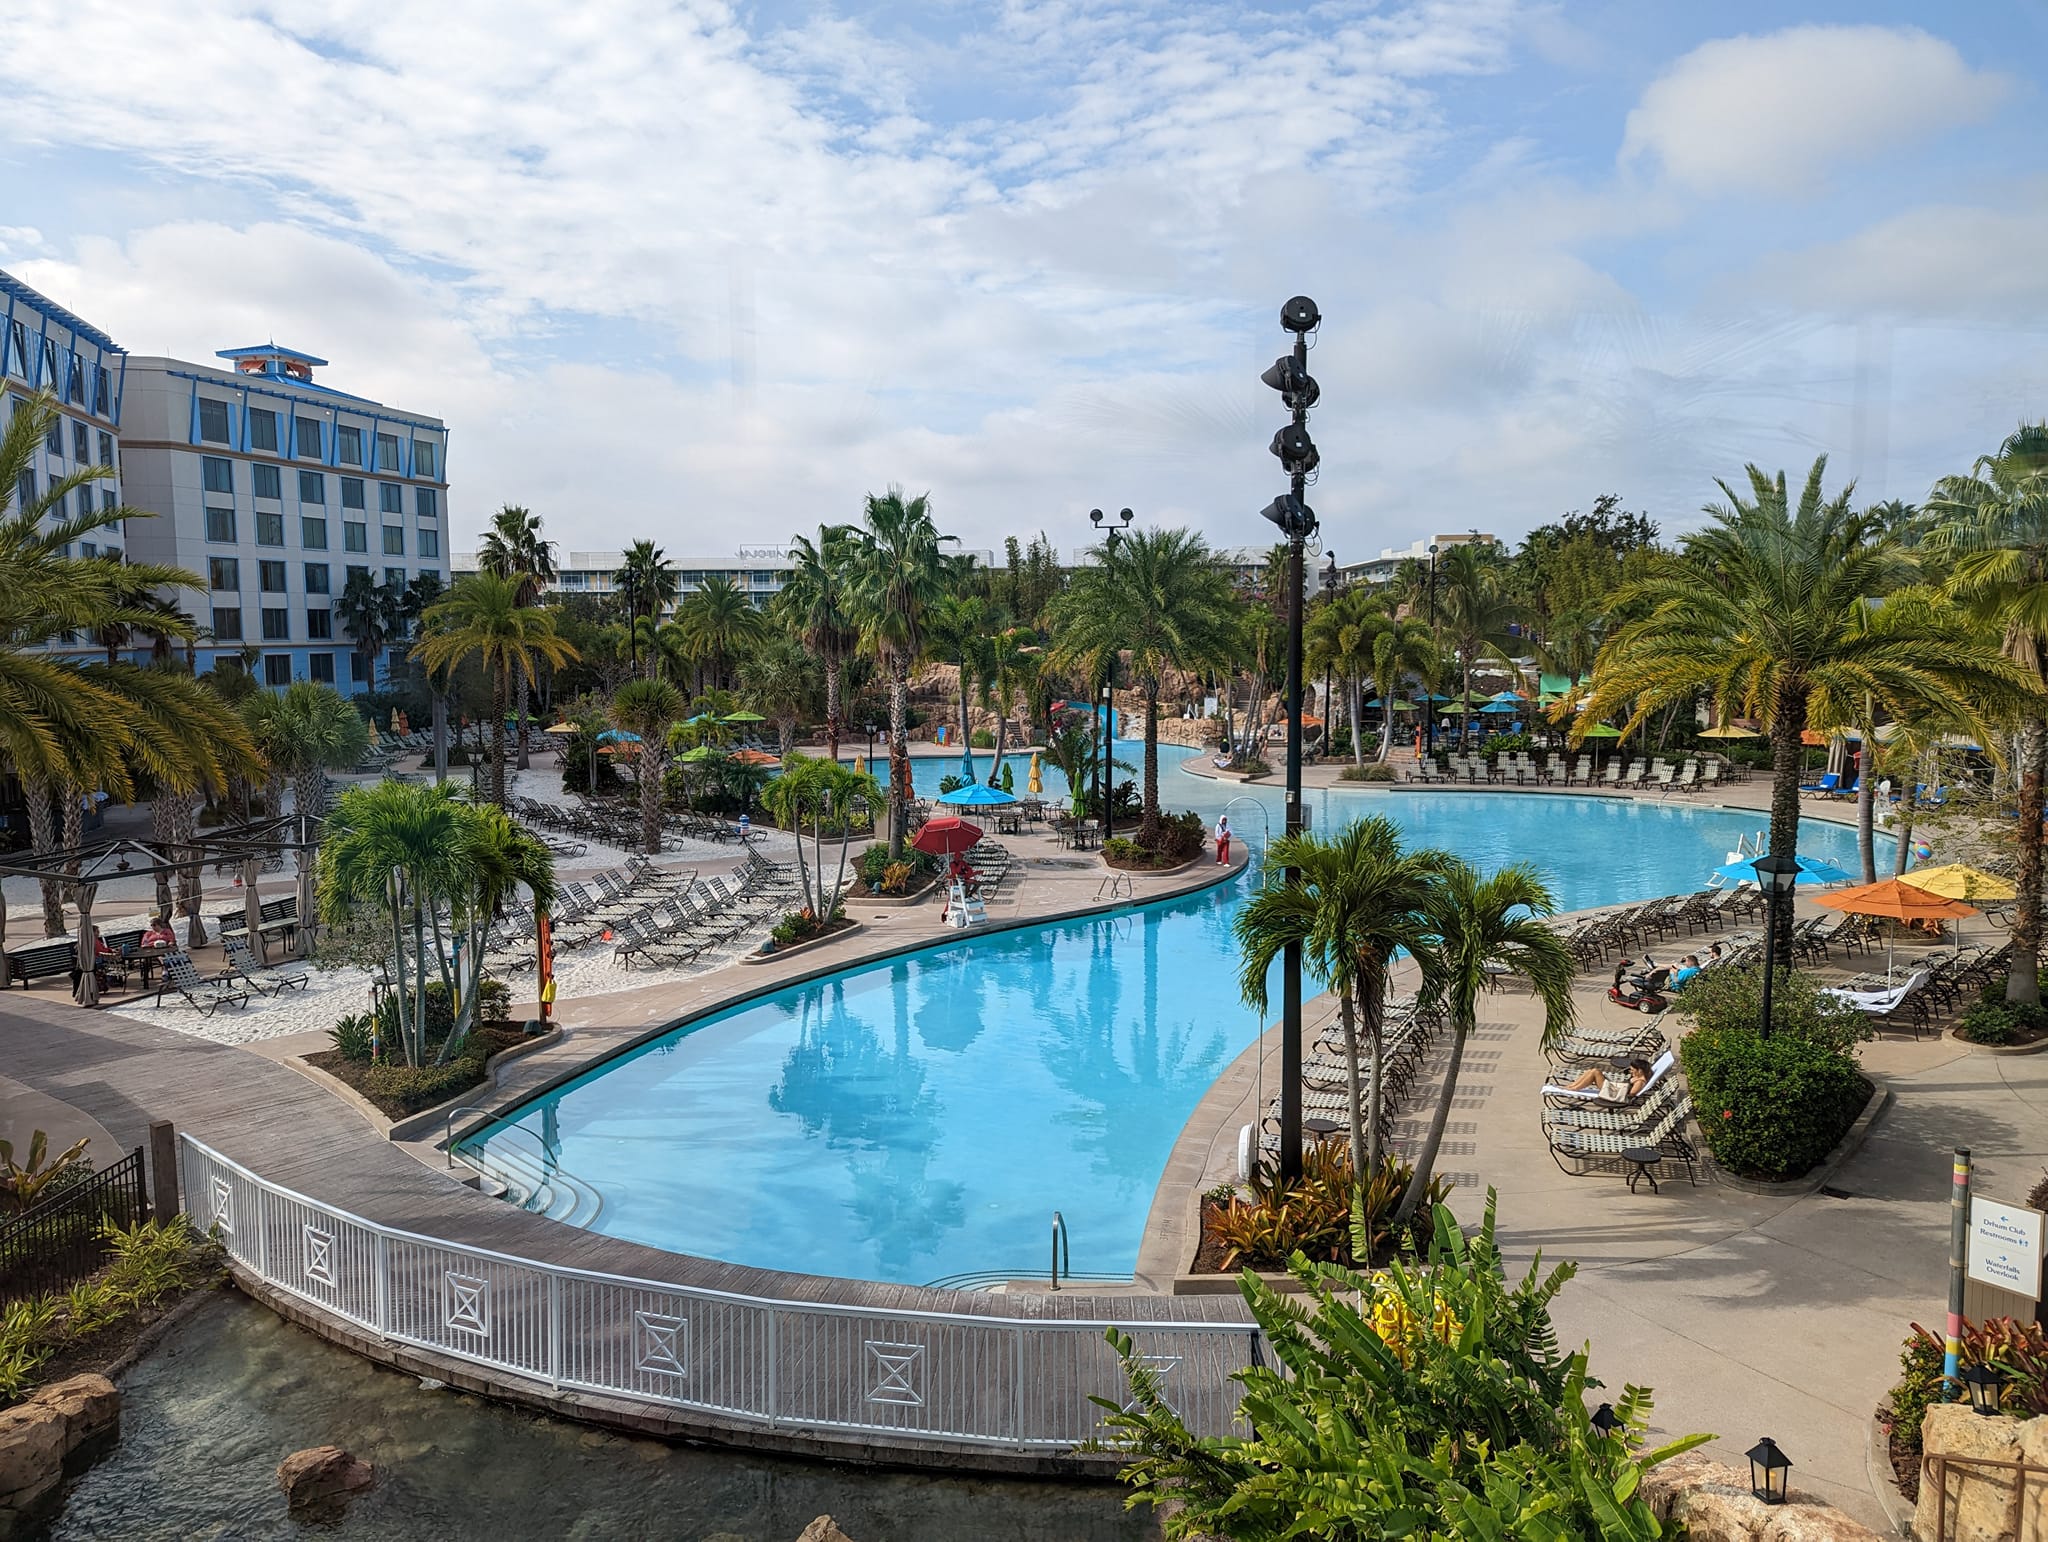 This is a view of Sapphire Falls pool